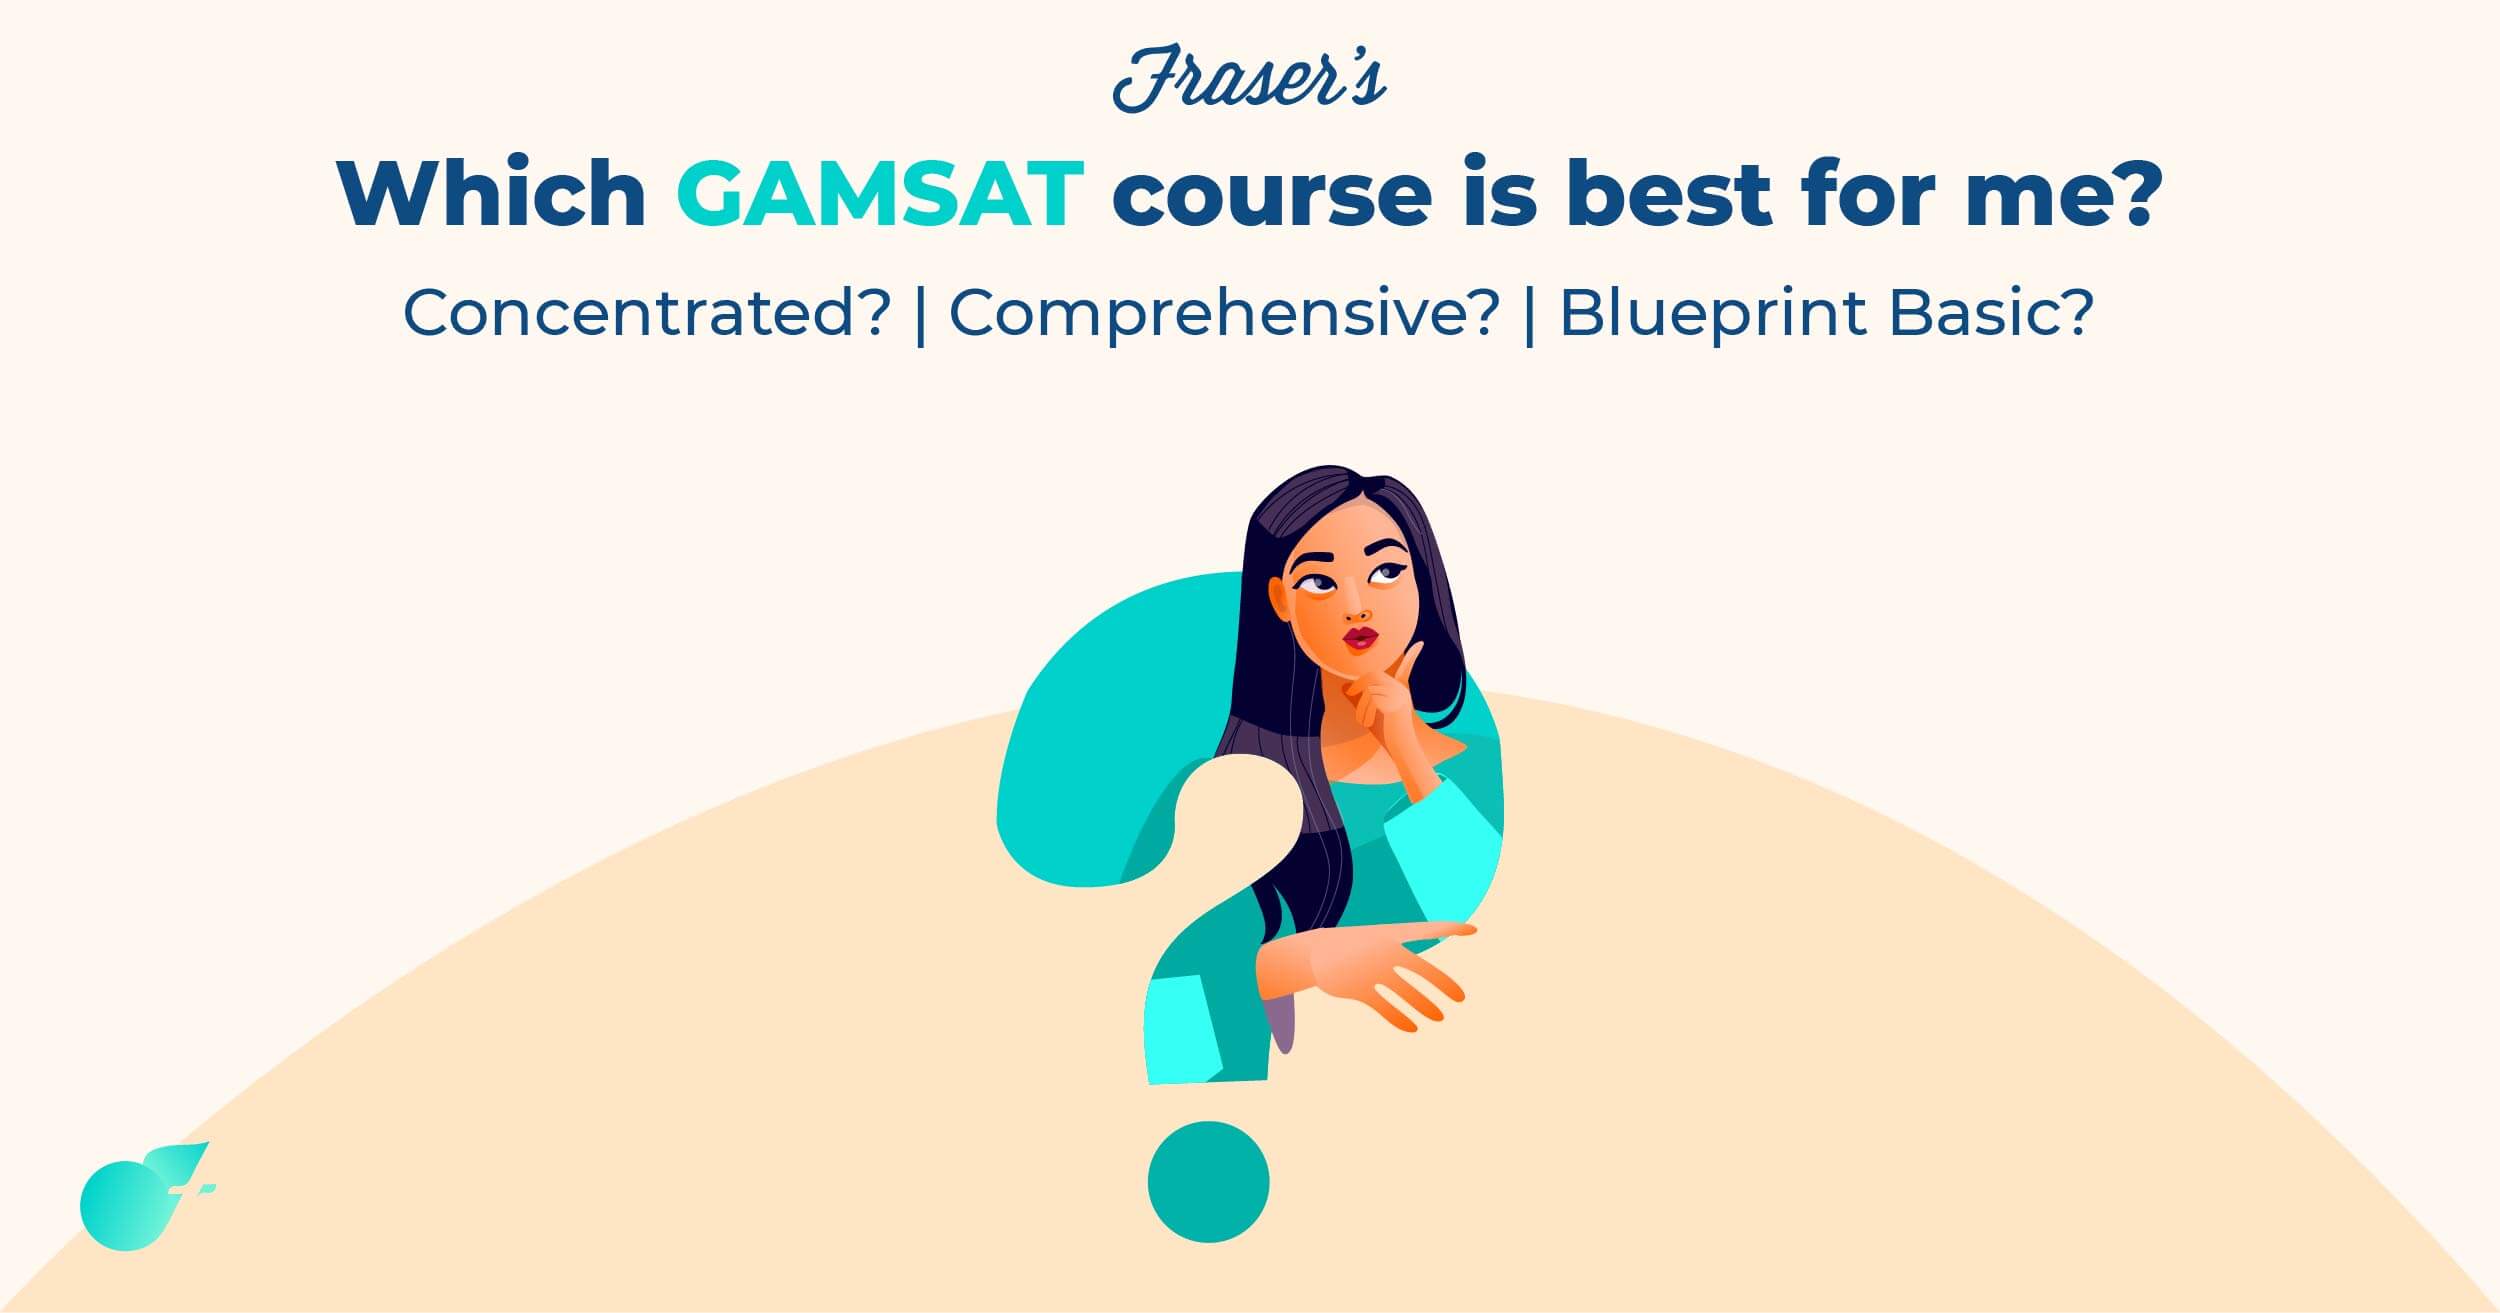 Which gamsat course is best for you